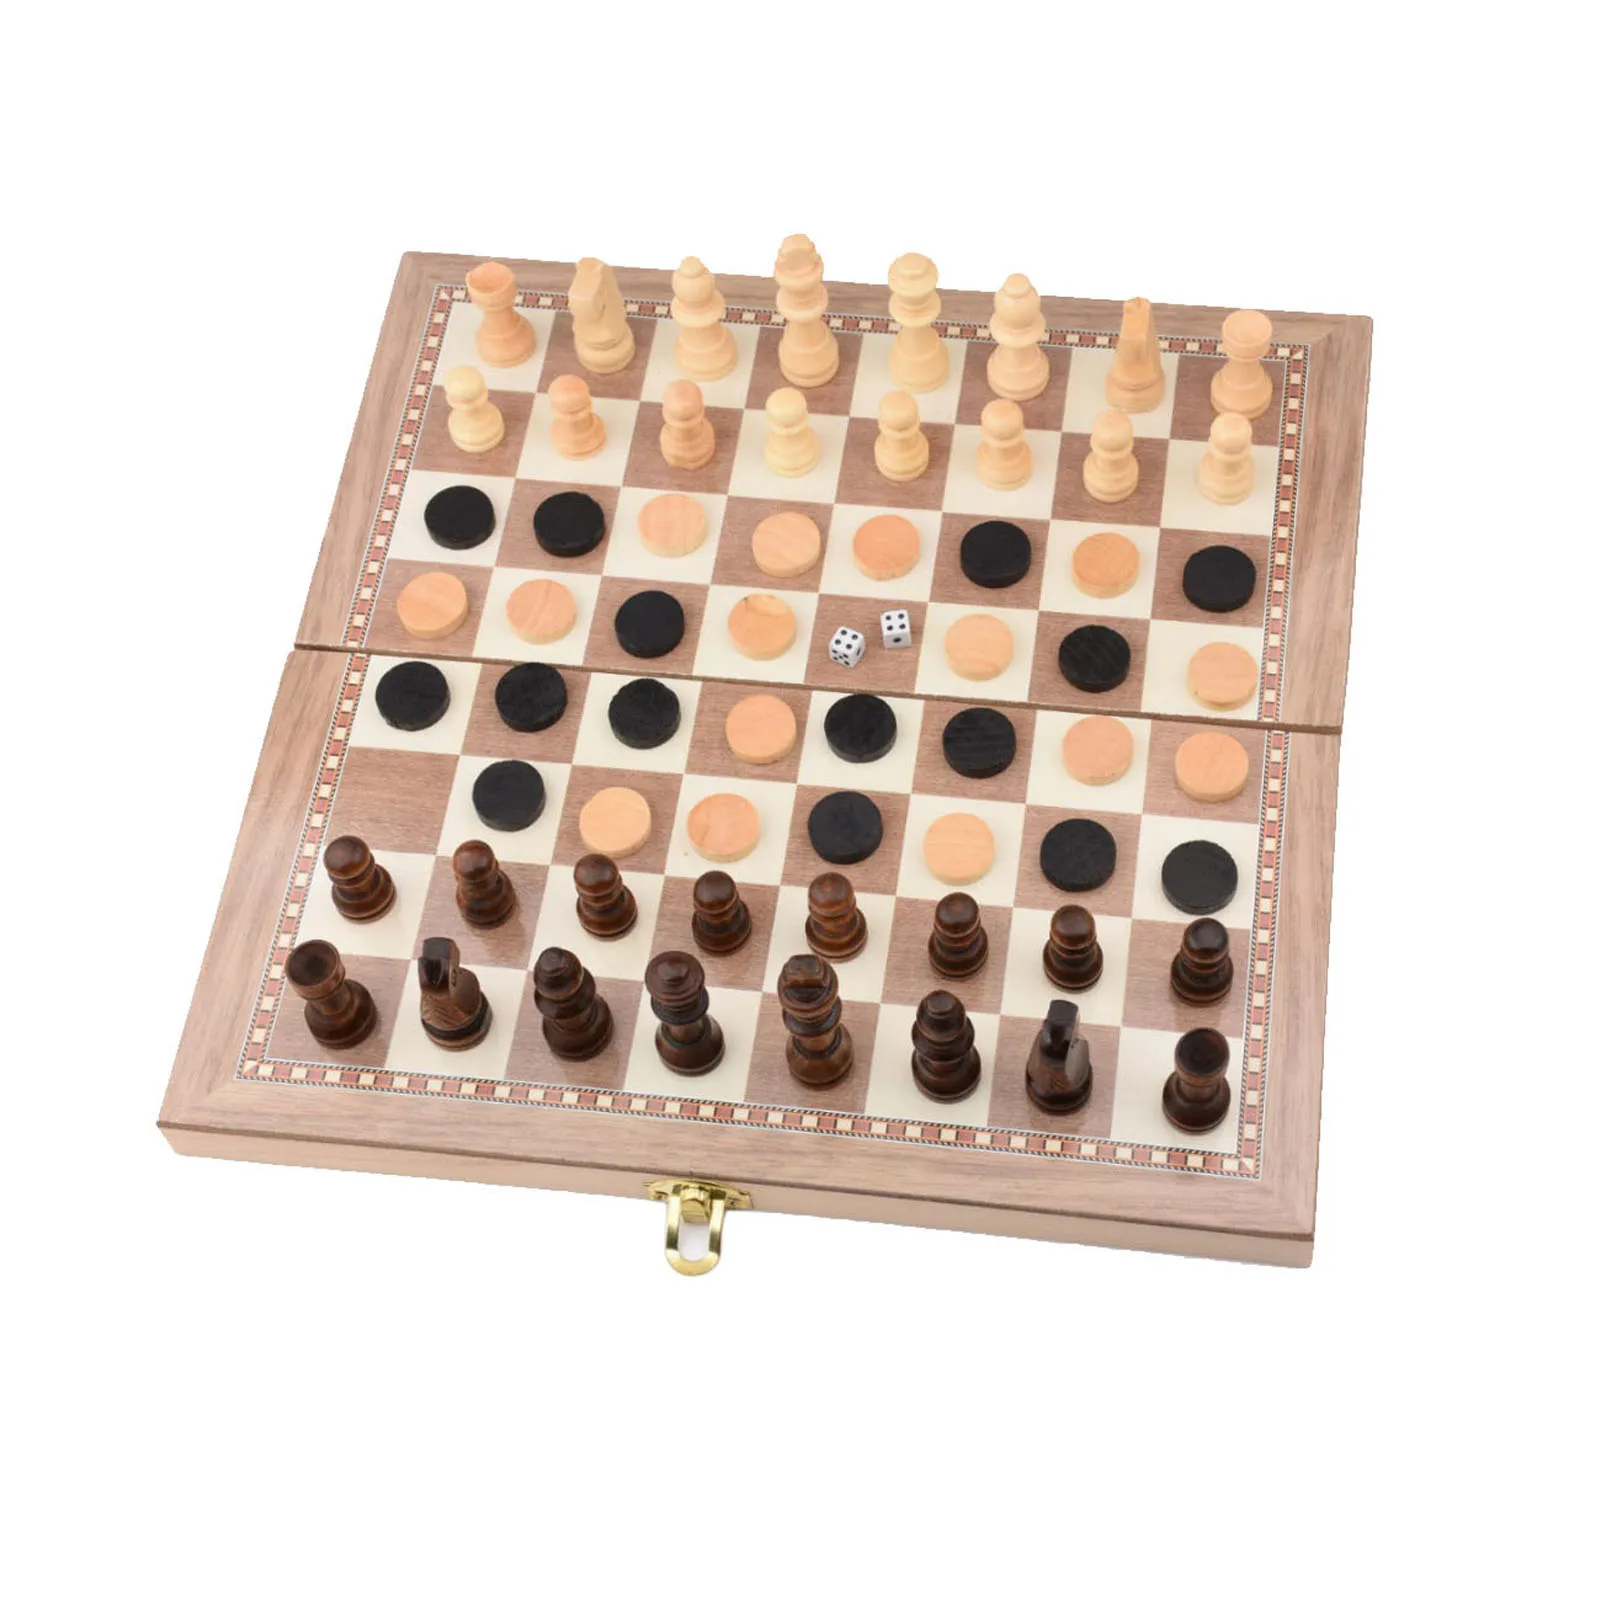 Фото - Folding Wooden Three-in-one Suit Chess Board Solid Wood Chess Checkers Suit Gomoku Suit Chess Set воблер storm gomoku crank 38f tr